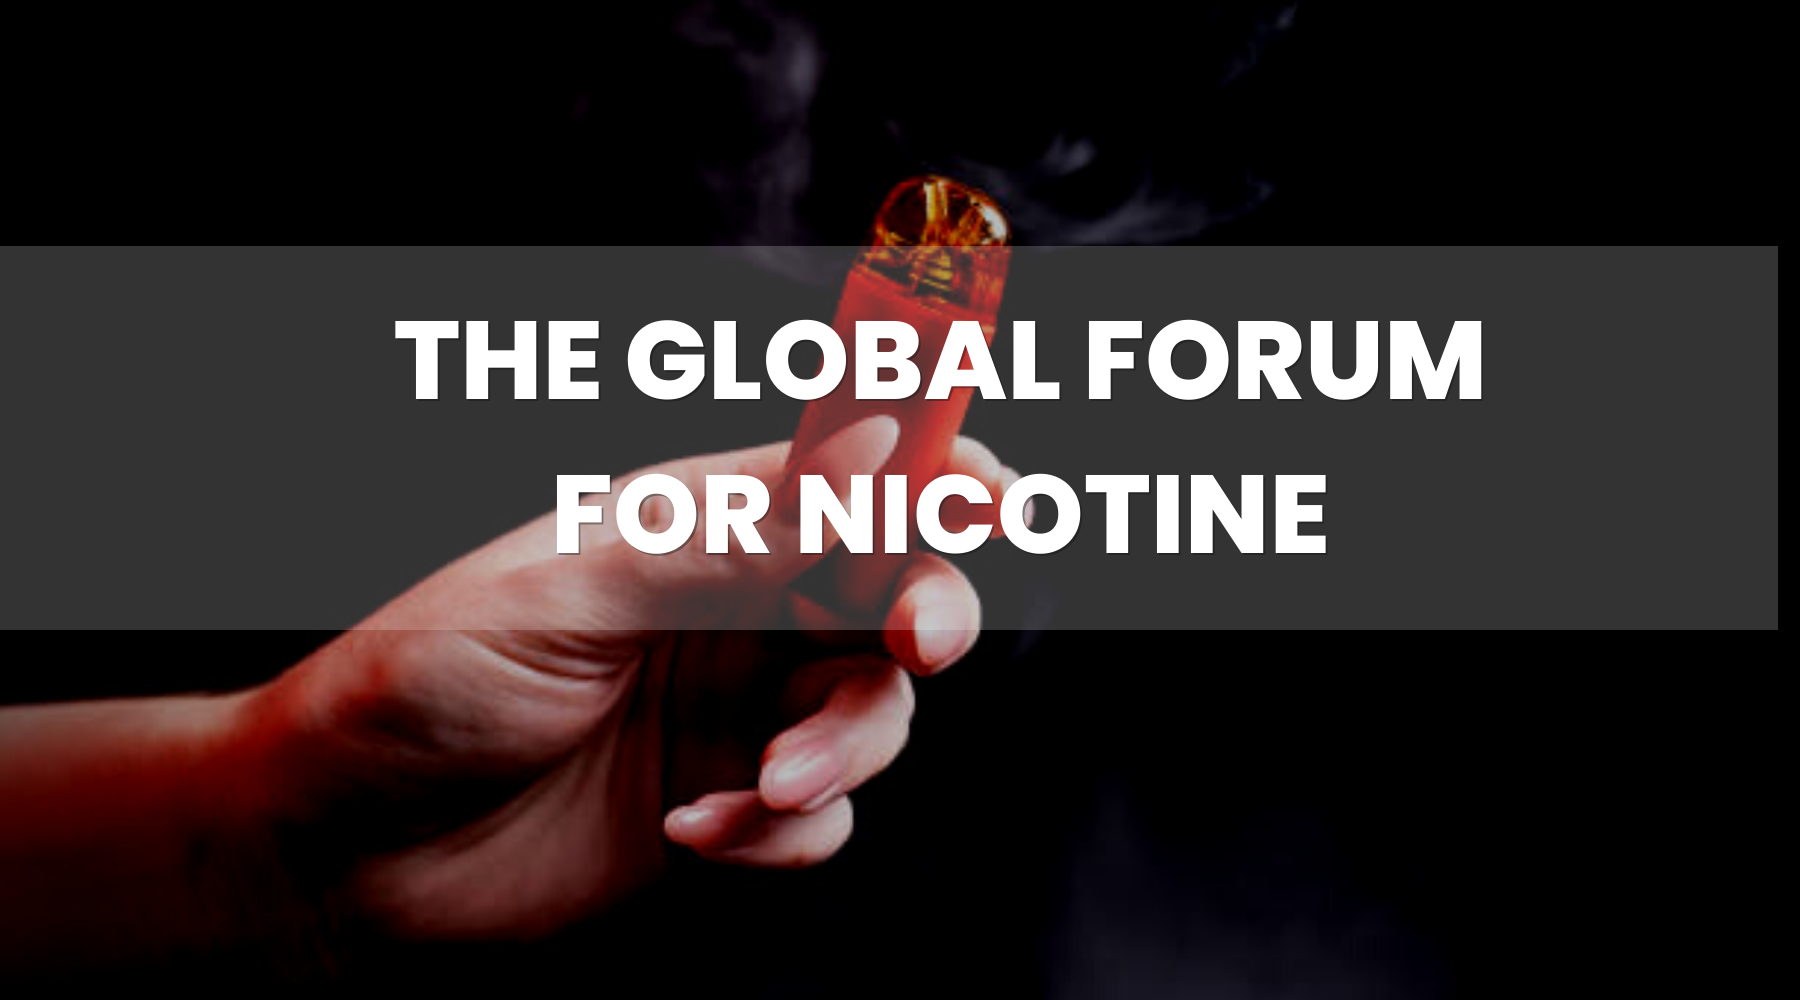 COP10? We Want GFN24! (The Global Forum For Nicotine)